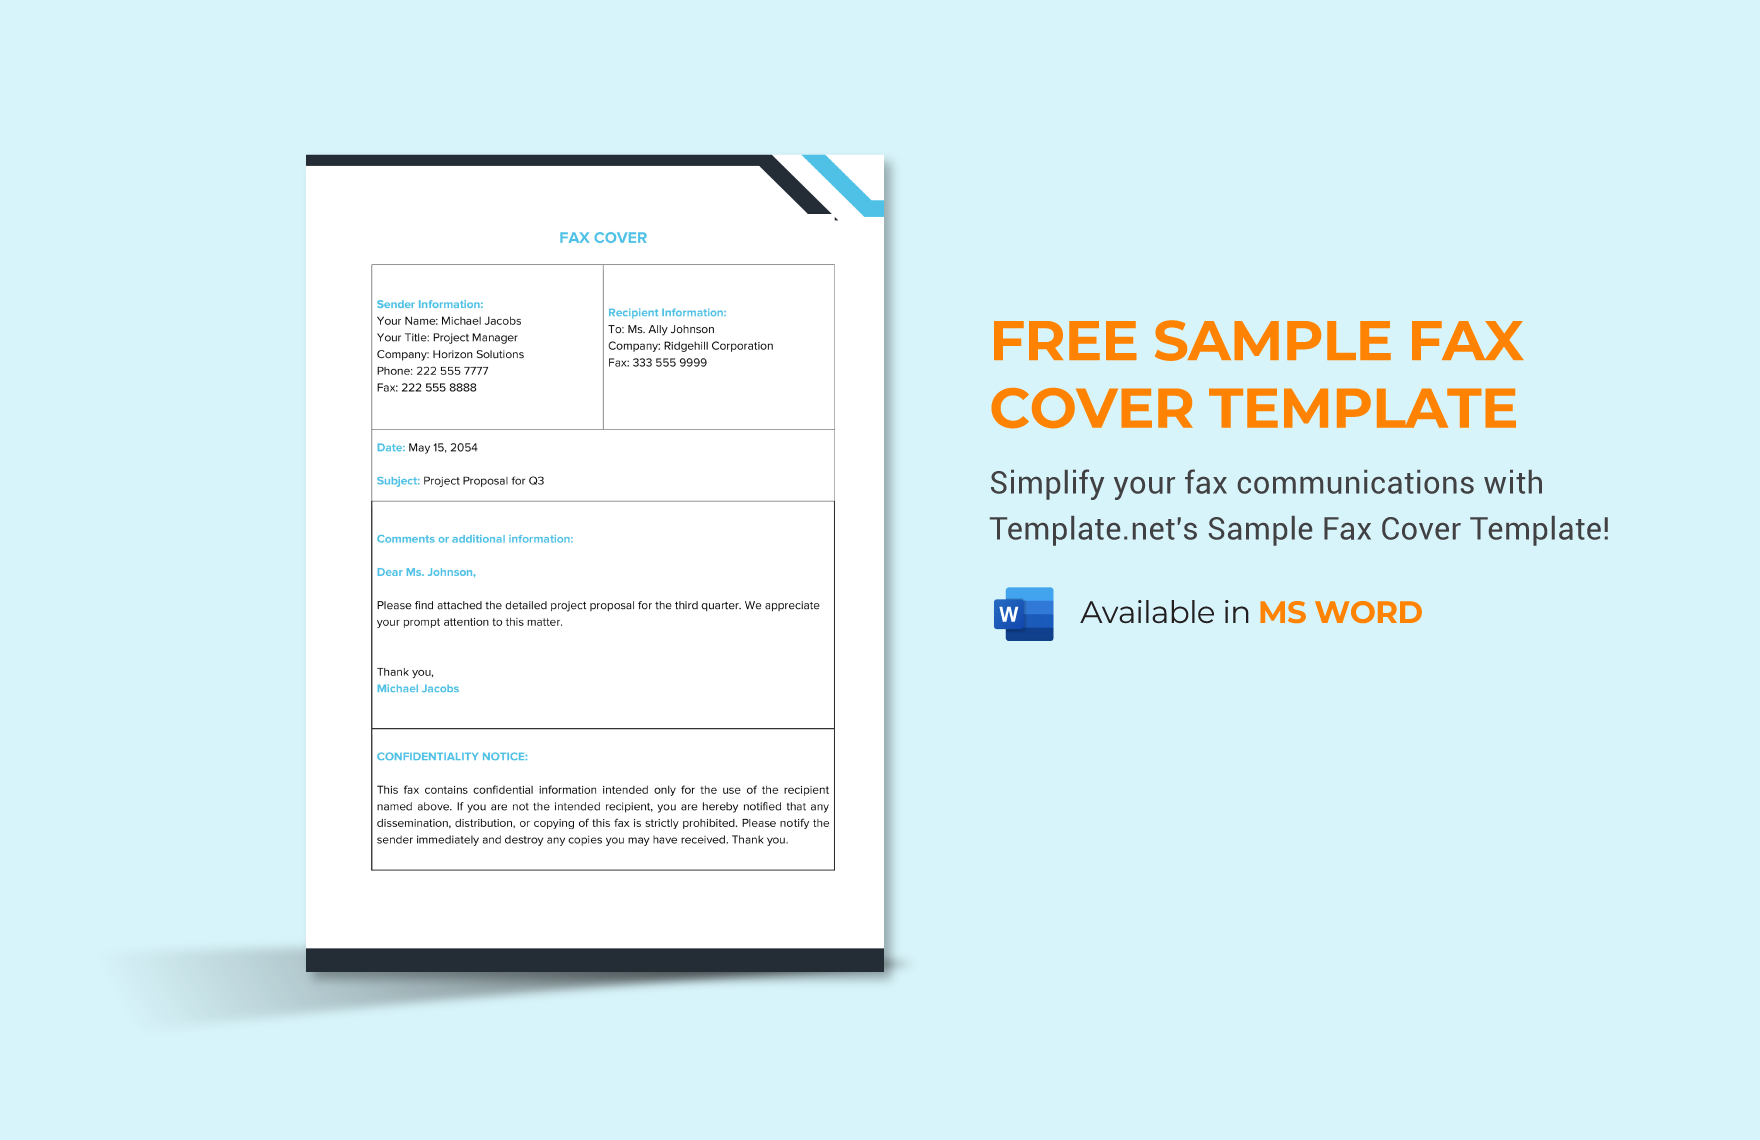 Sample Fax Cover Template